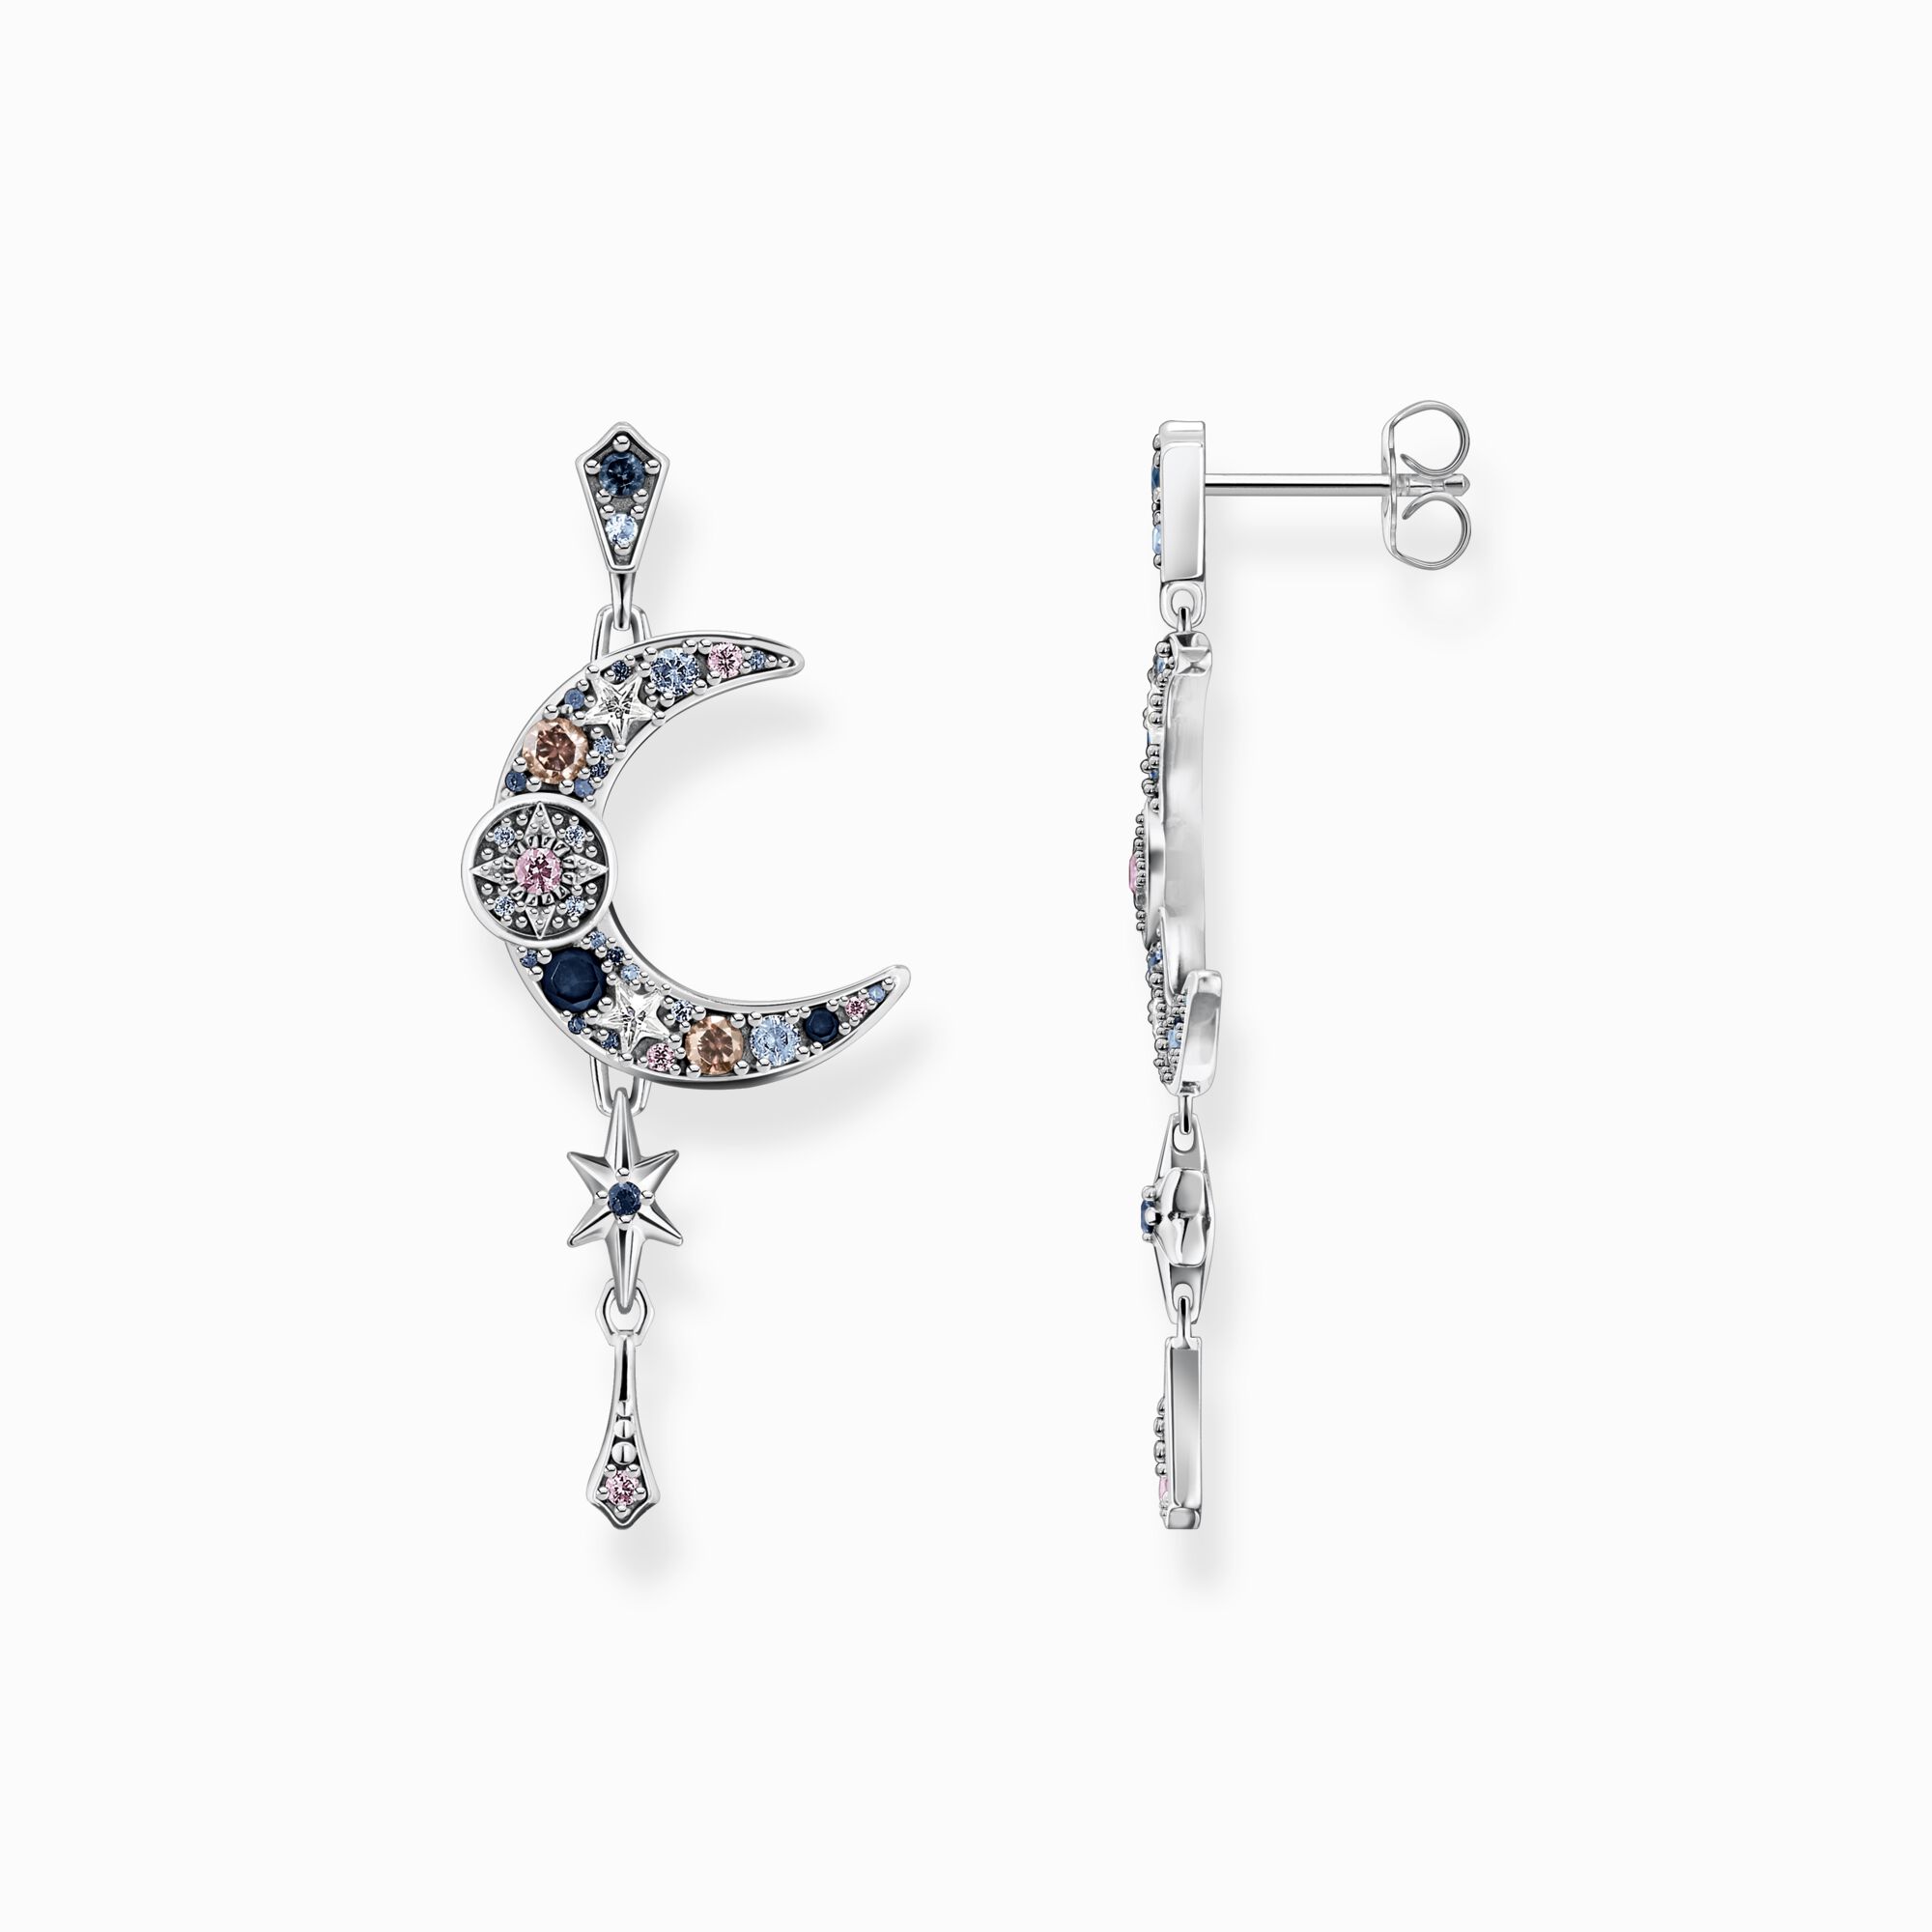 Earrings Royalty moon with stones silver from the  collection in the THOMAS SABO online store